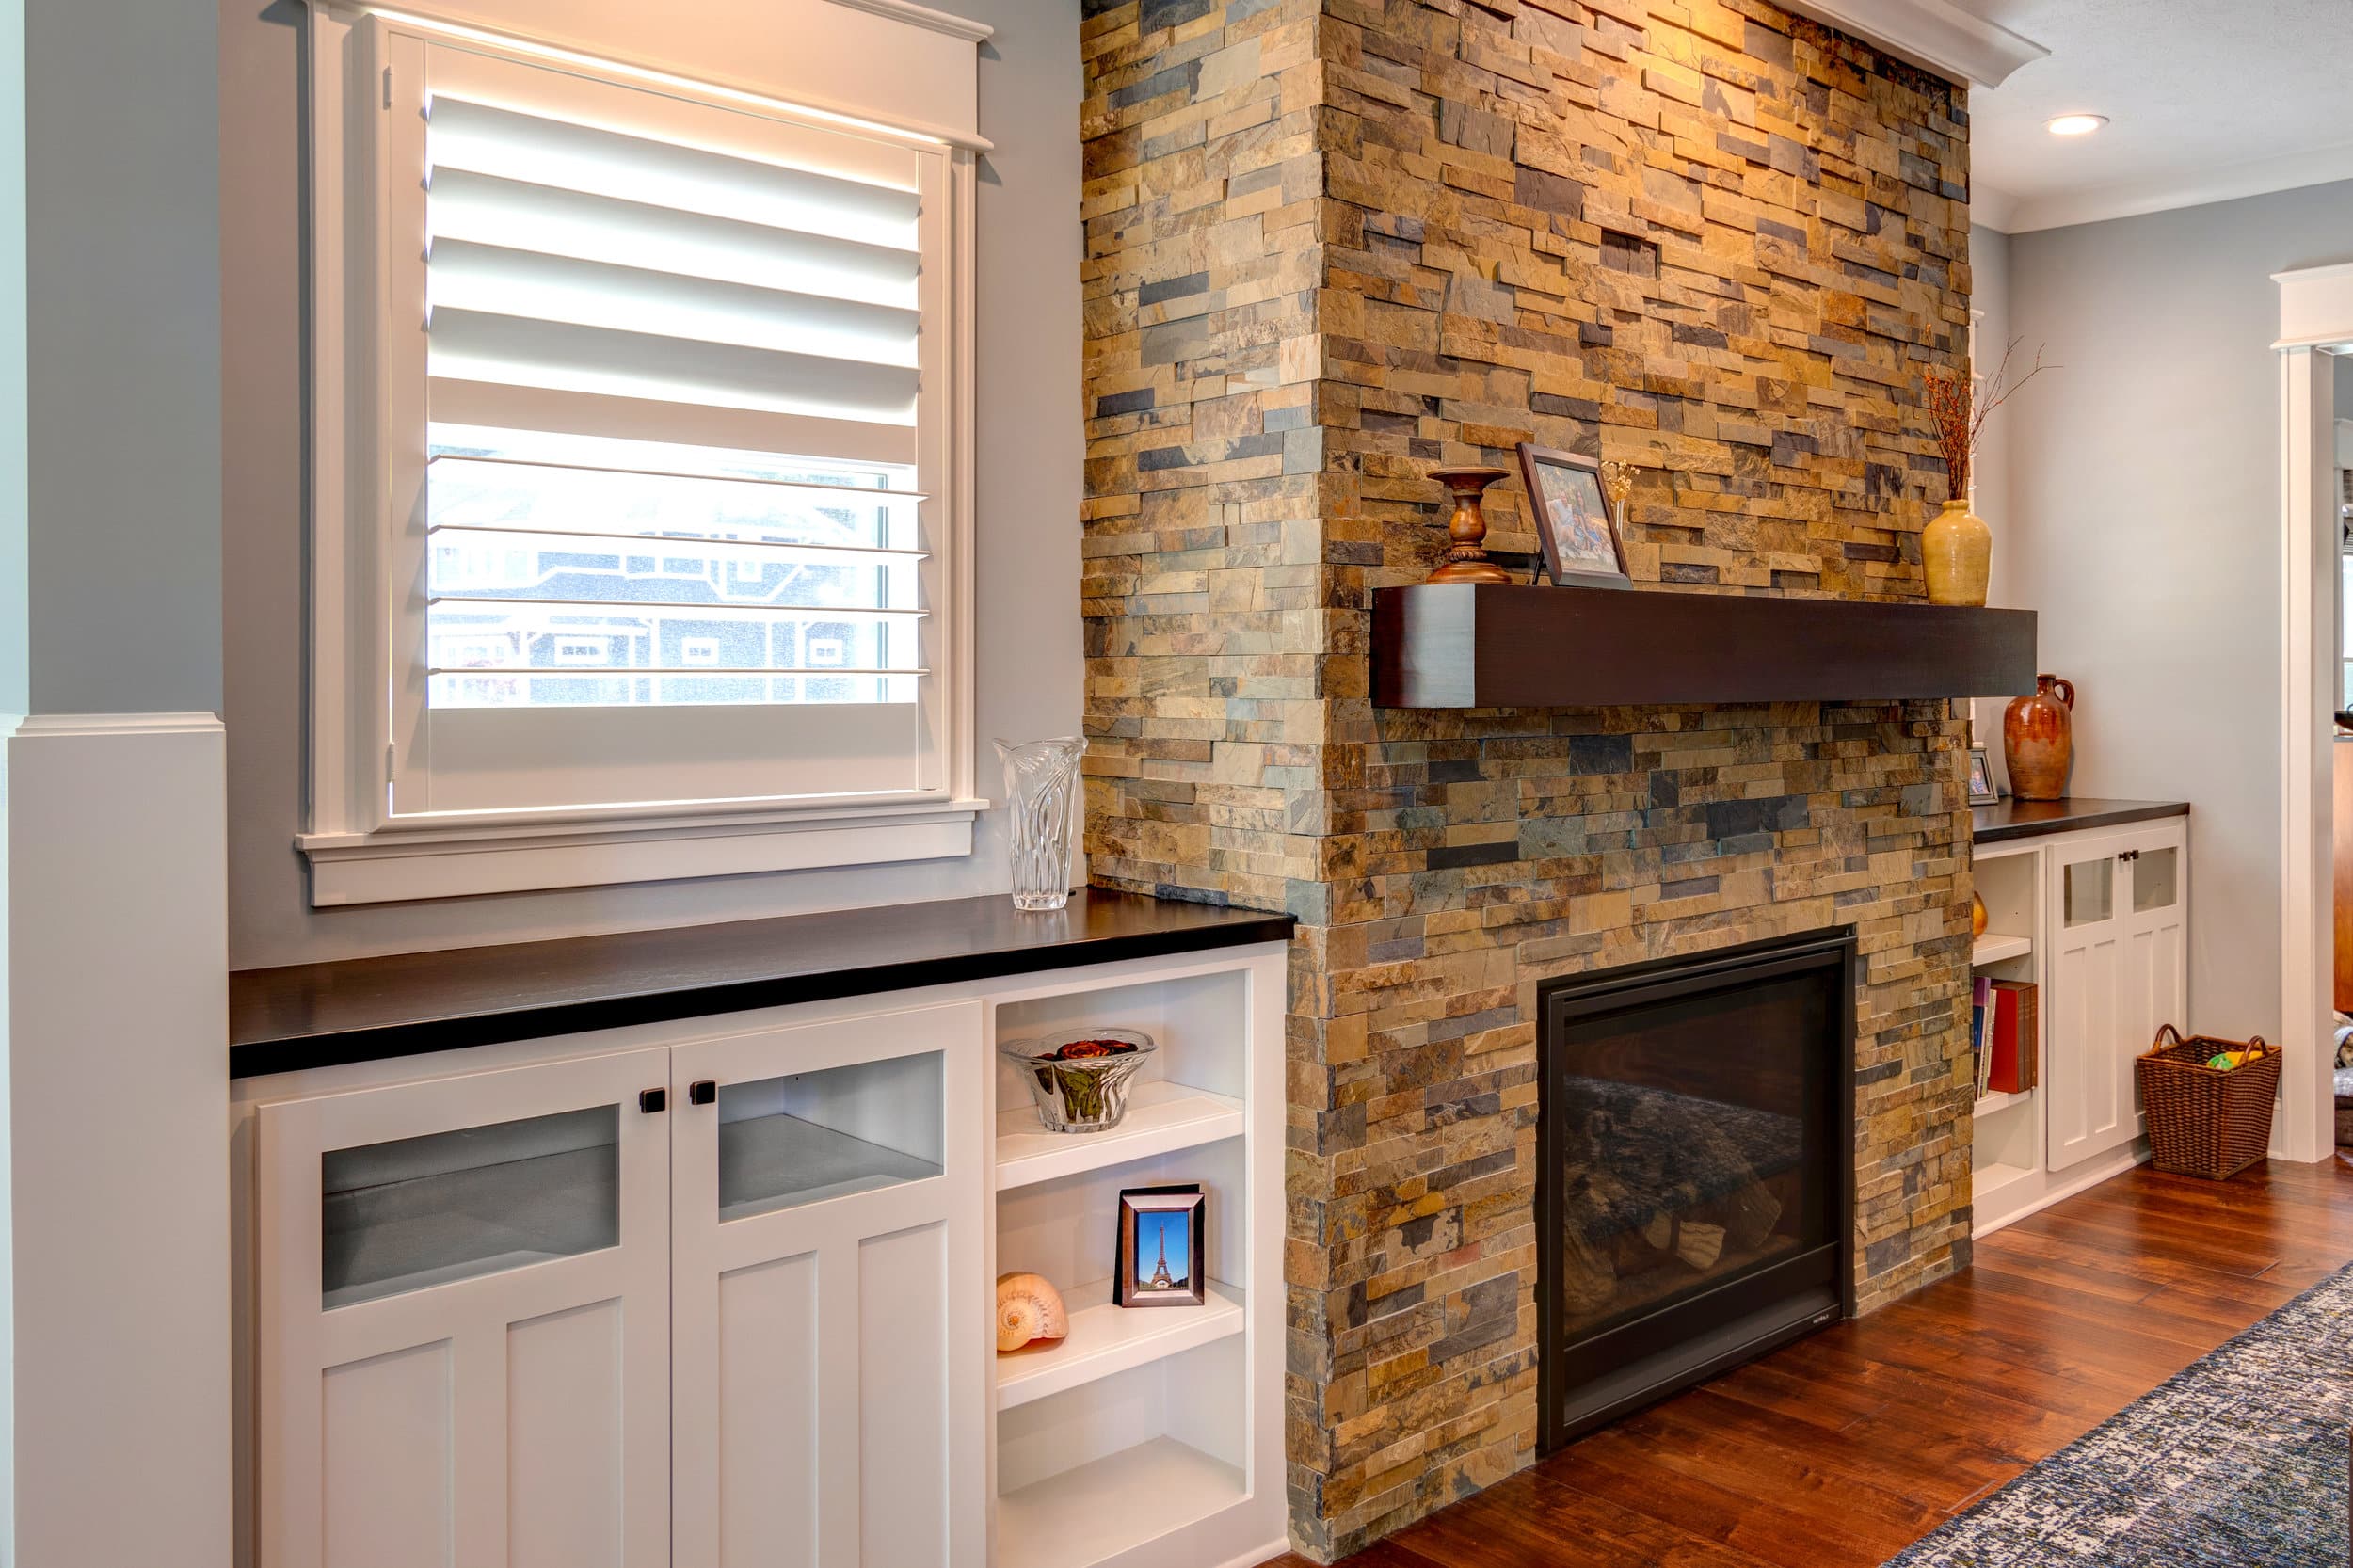 A living room with a stone fireplace and white cabinets in a custom home.